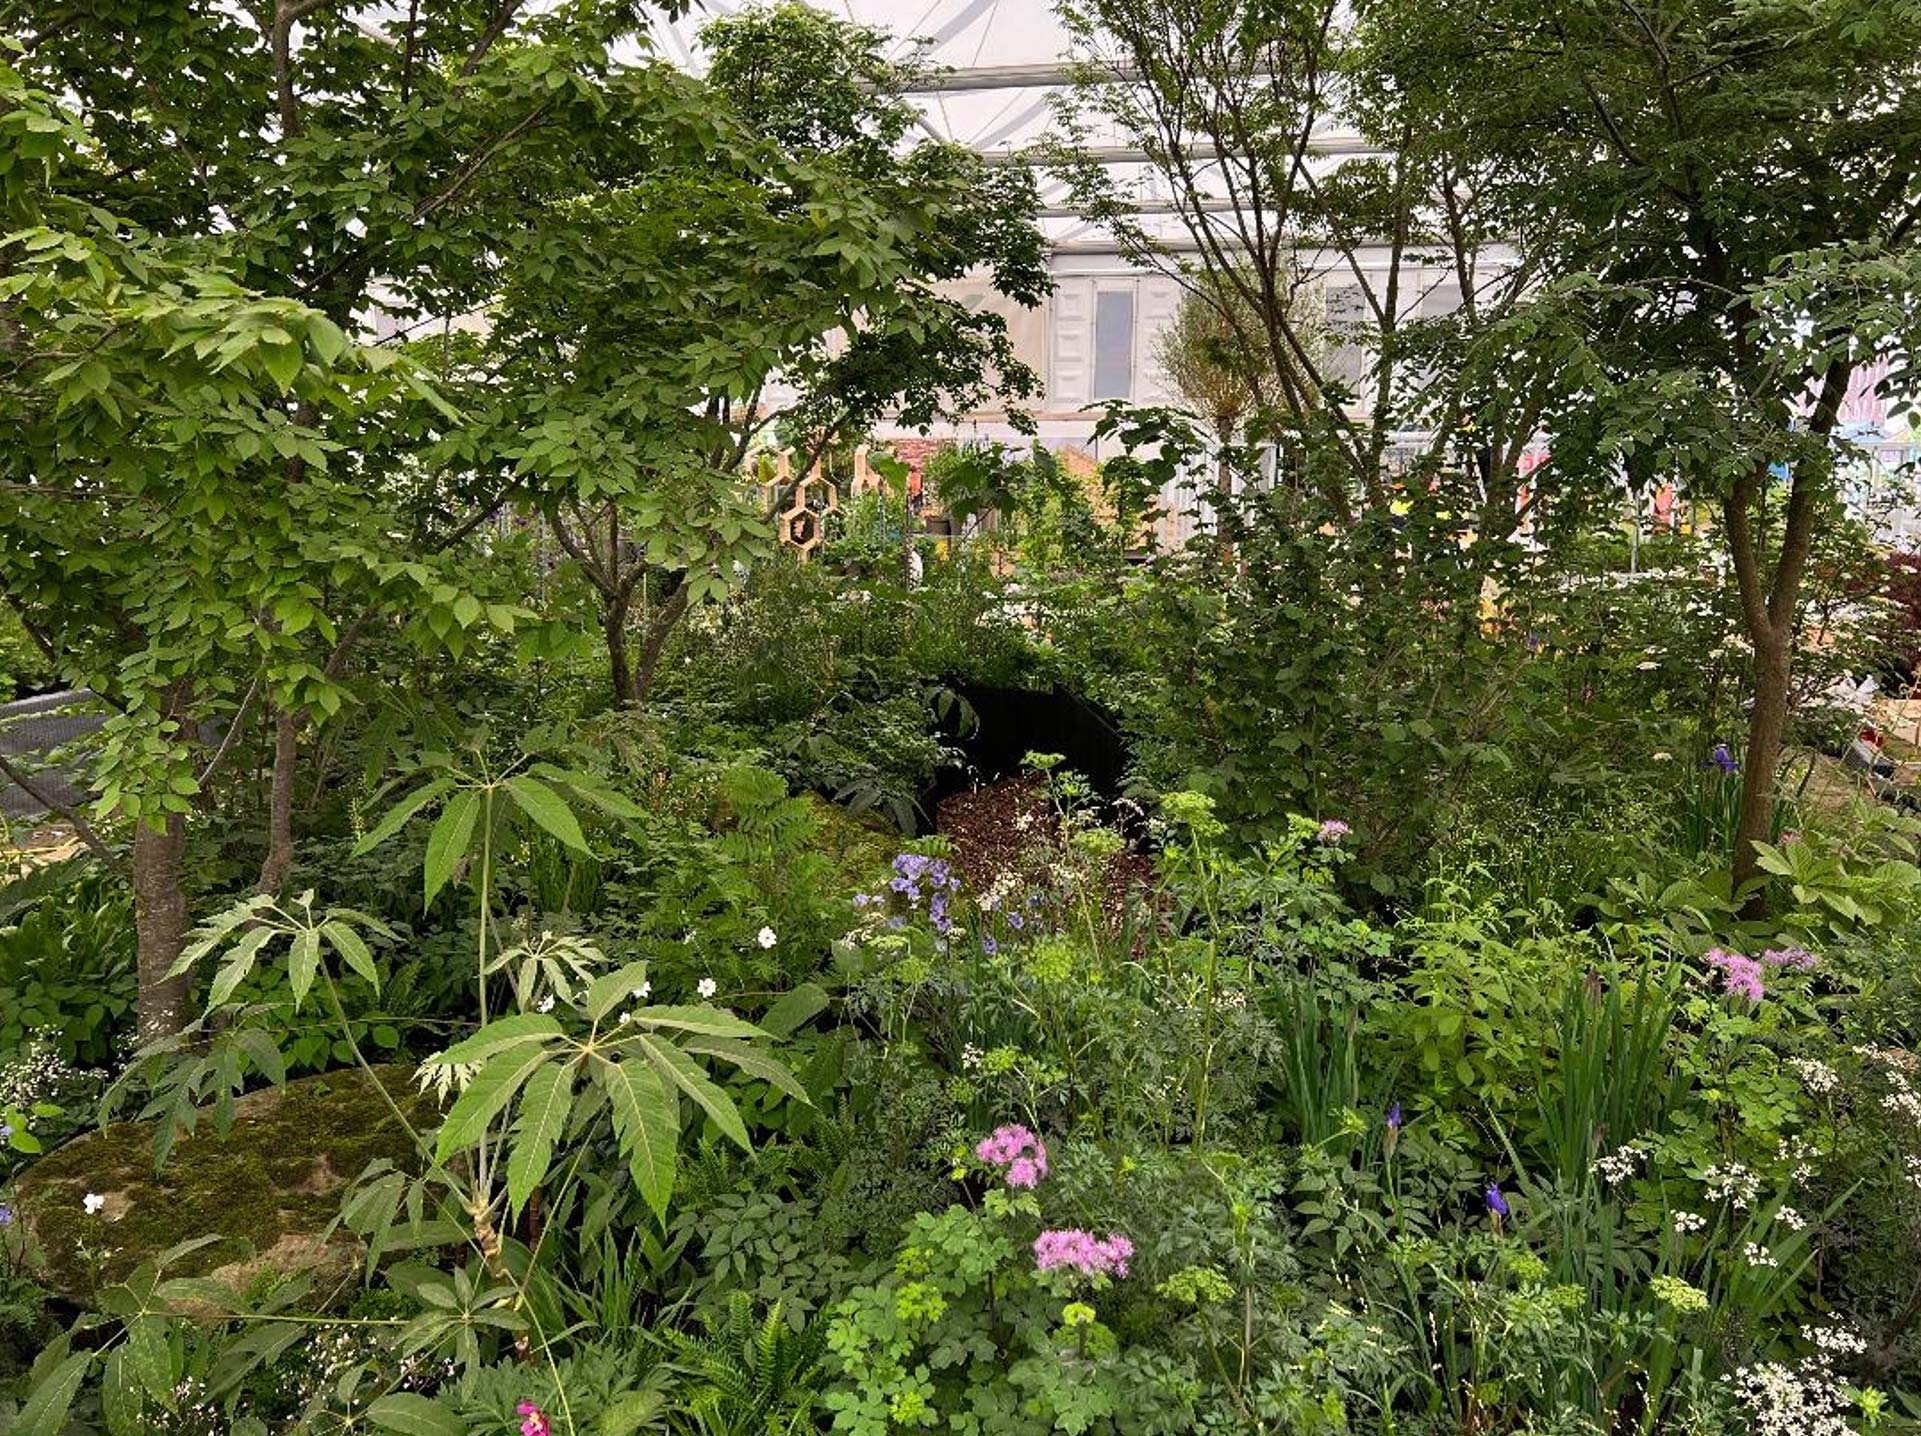 Supporting the Wilderness Foundation UK’s garden at RHS Chelsea Flower Show 2022